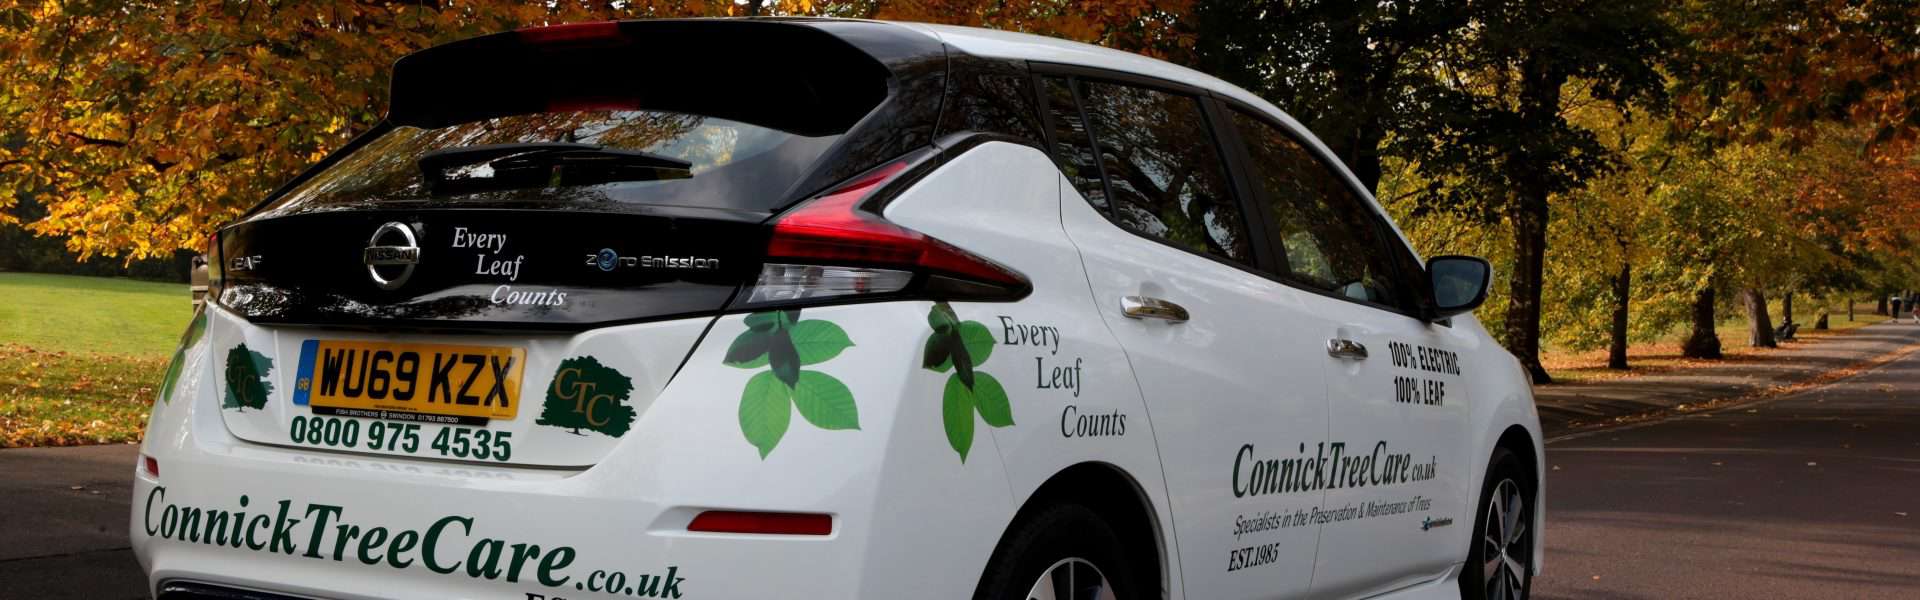 Car with Connick Tree Care branding